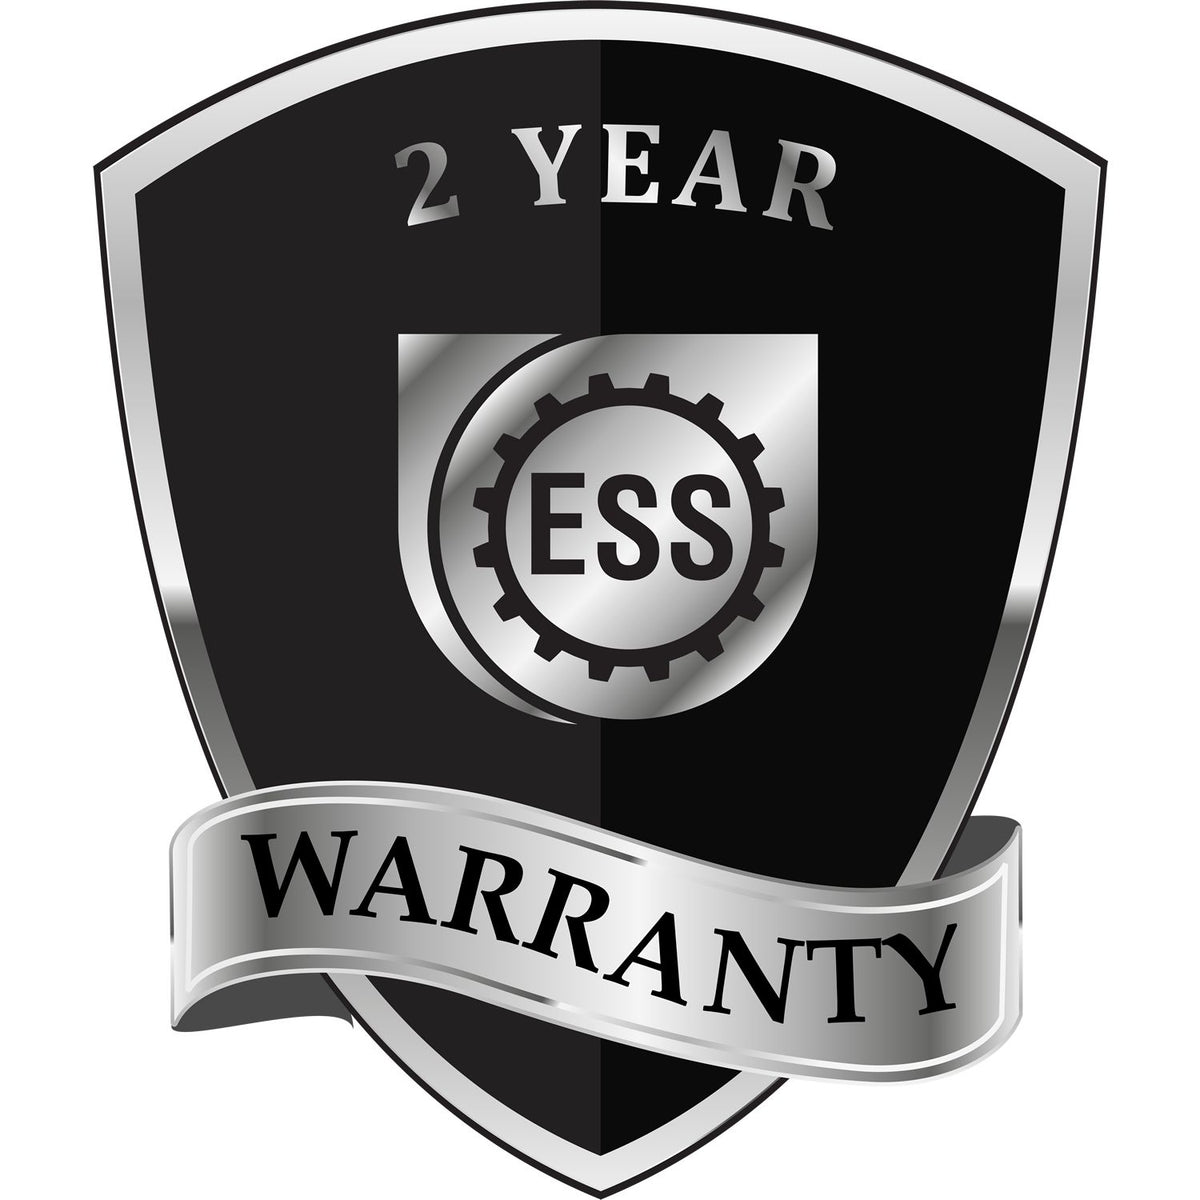 A badge or emblem showing a warranty icon for the State of Tennessee Architectural Seal Embosser